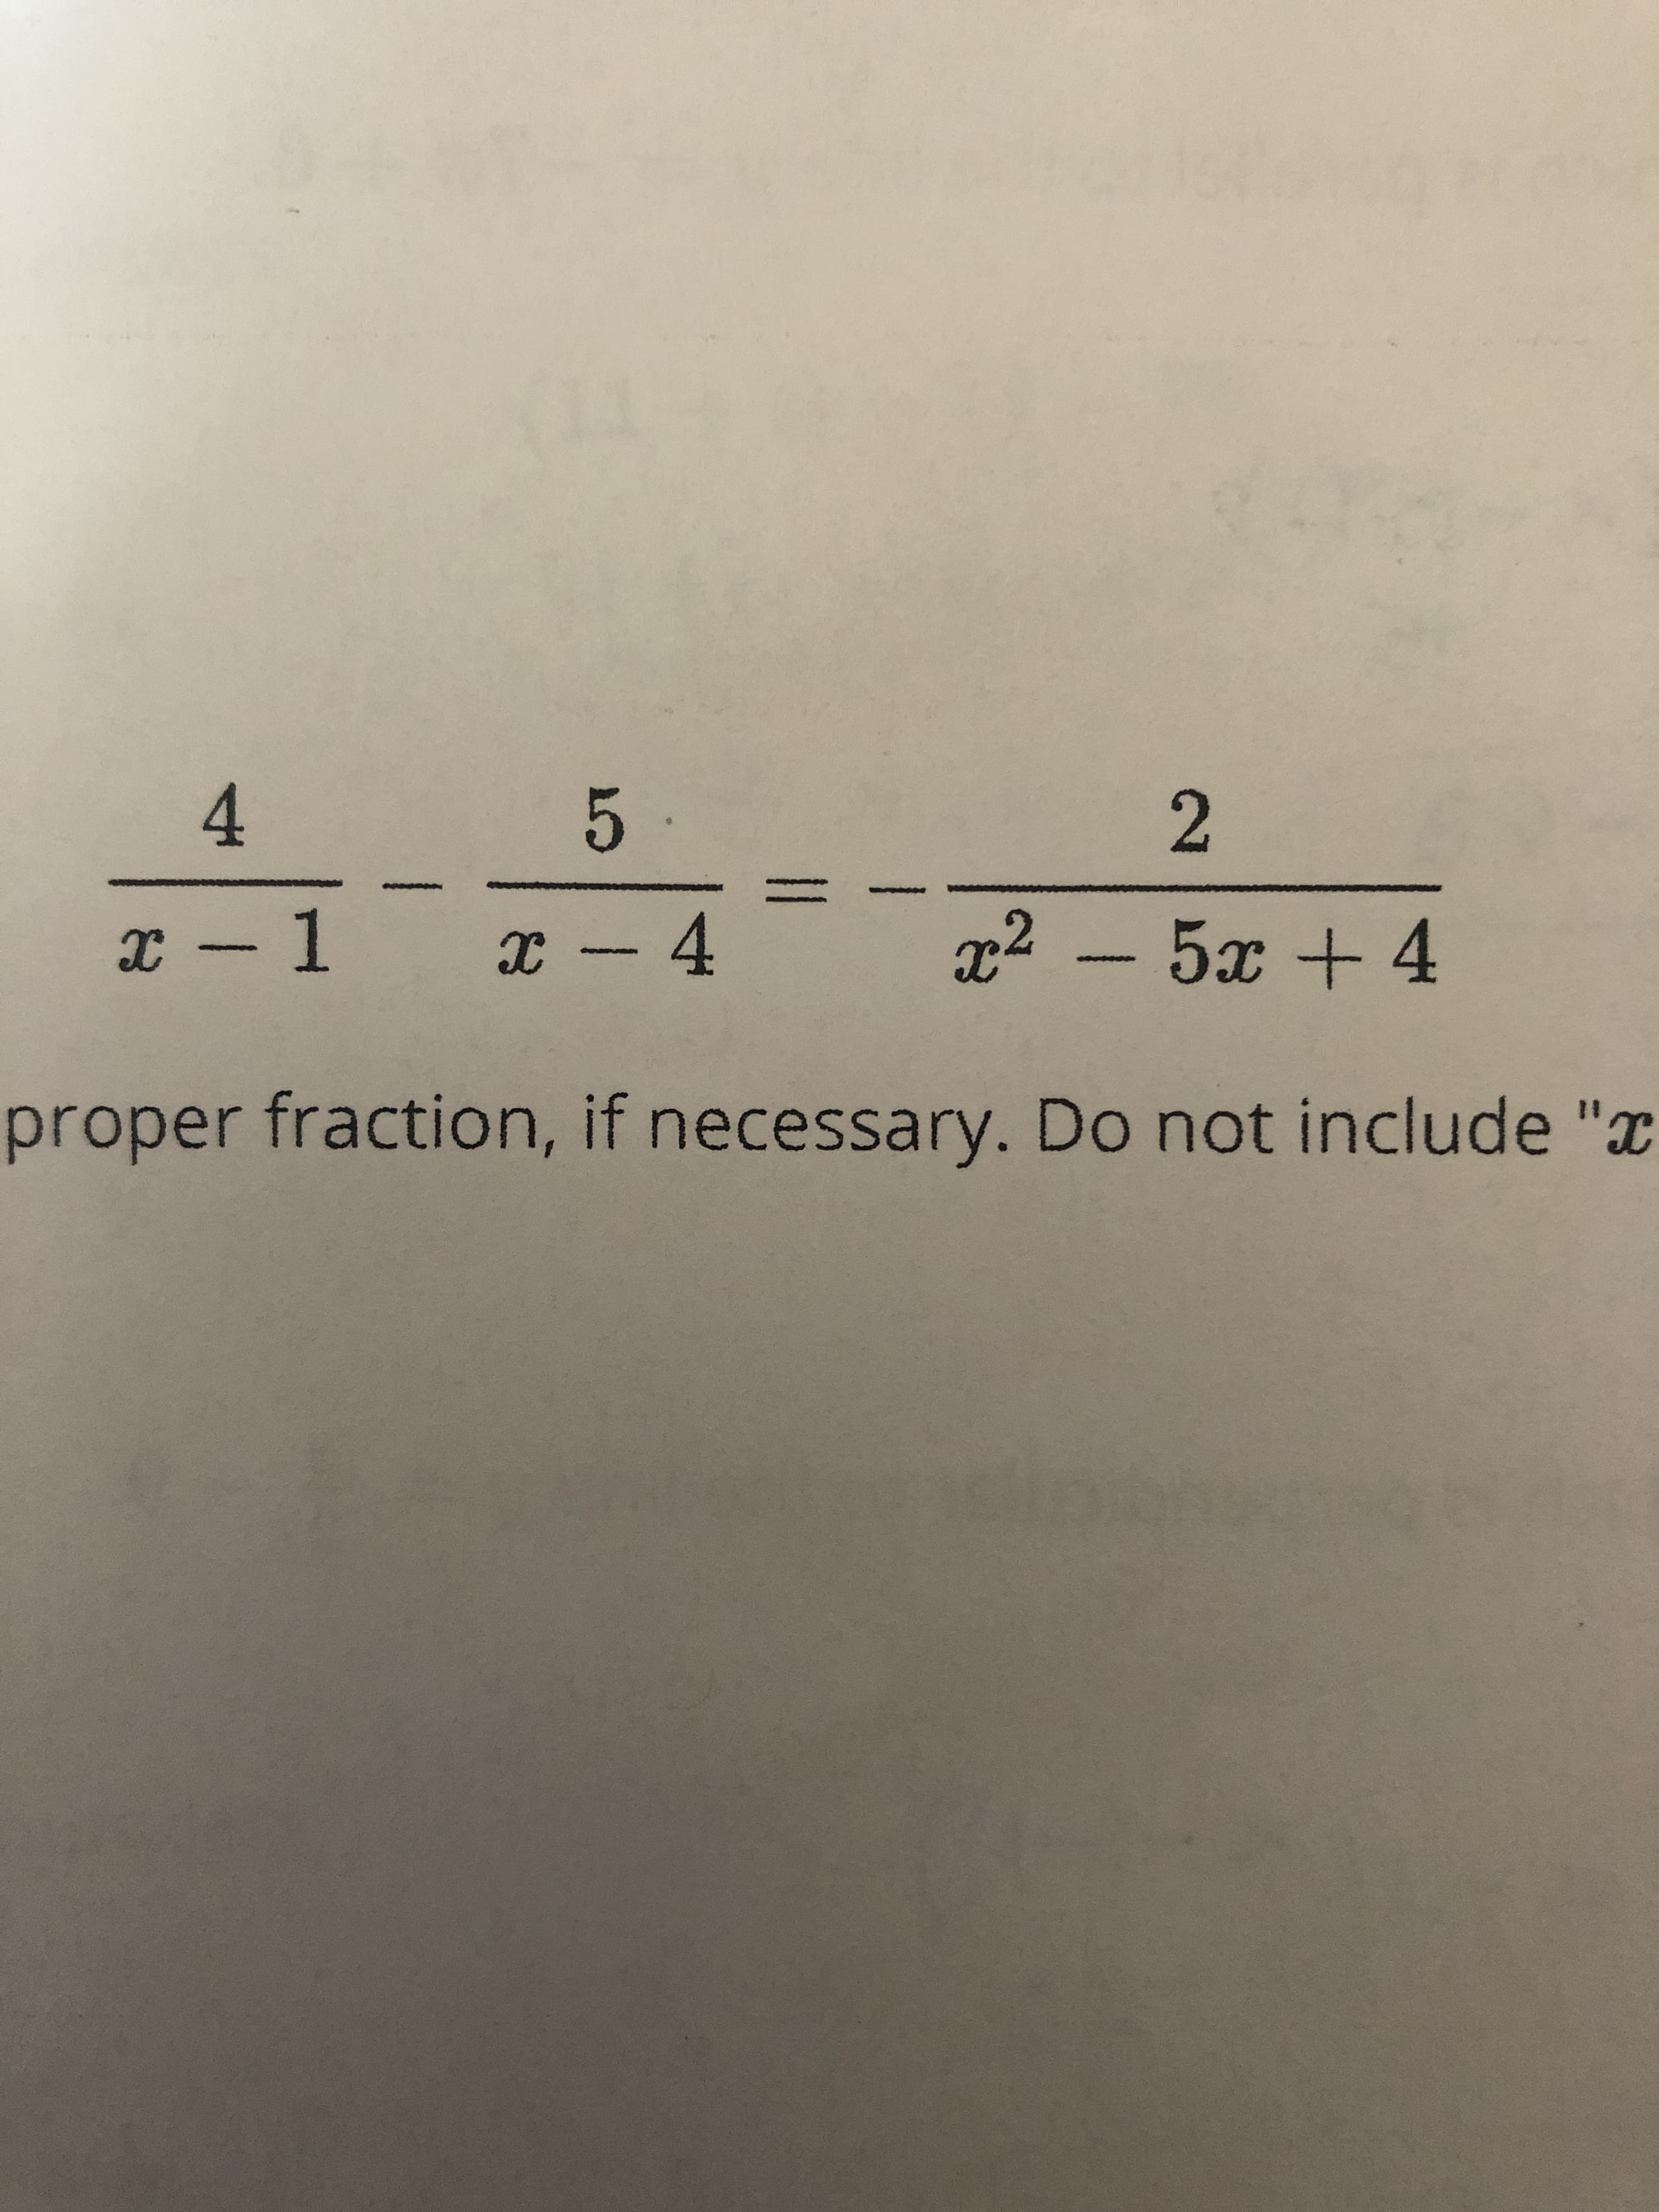 4
5-
x -1 x - 4
x2 -5x + 4
proper fraction, if necessary. Do not include "x
